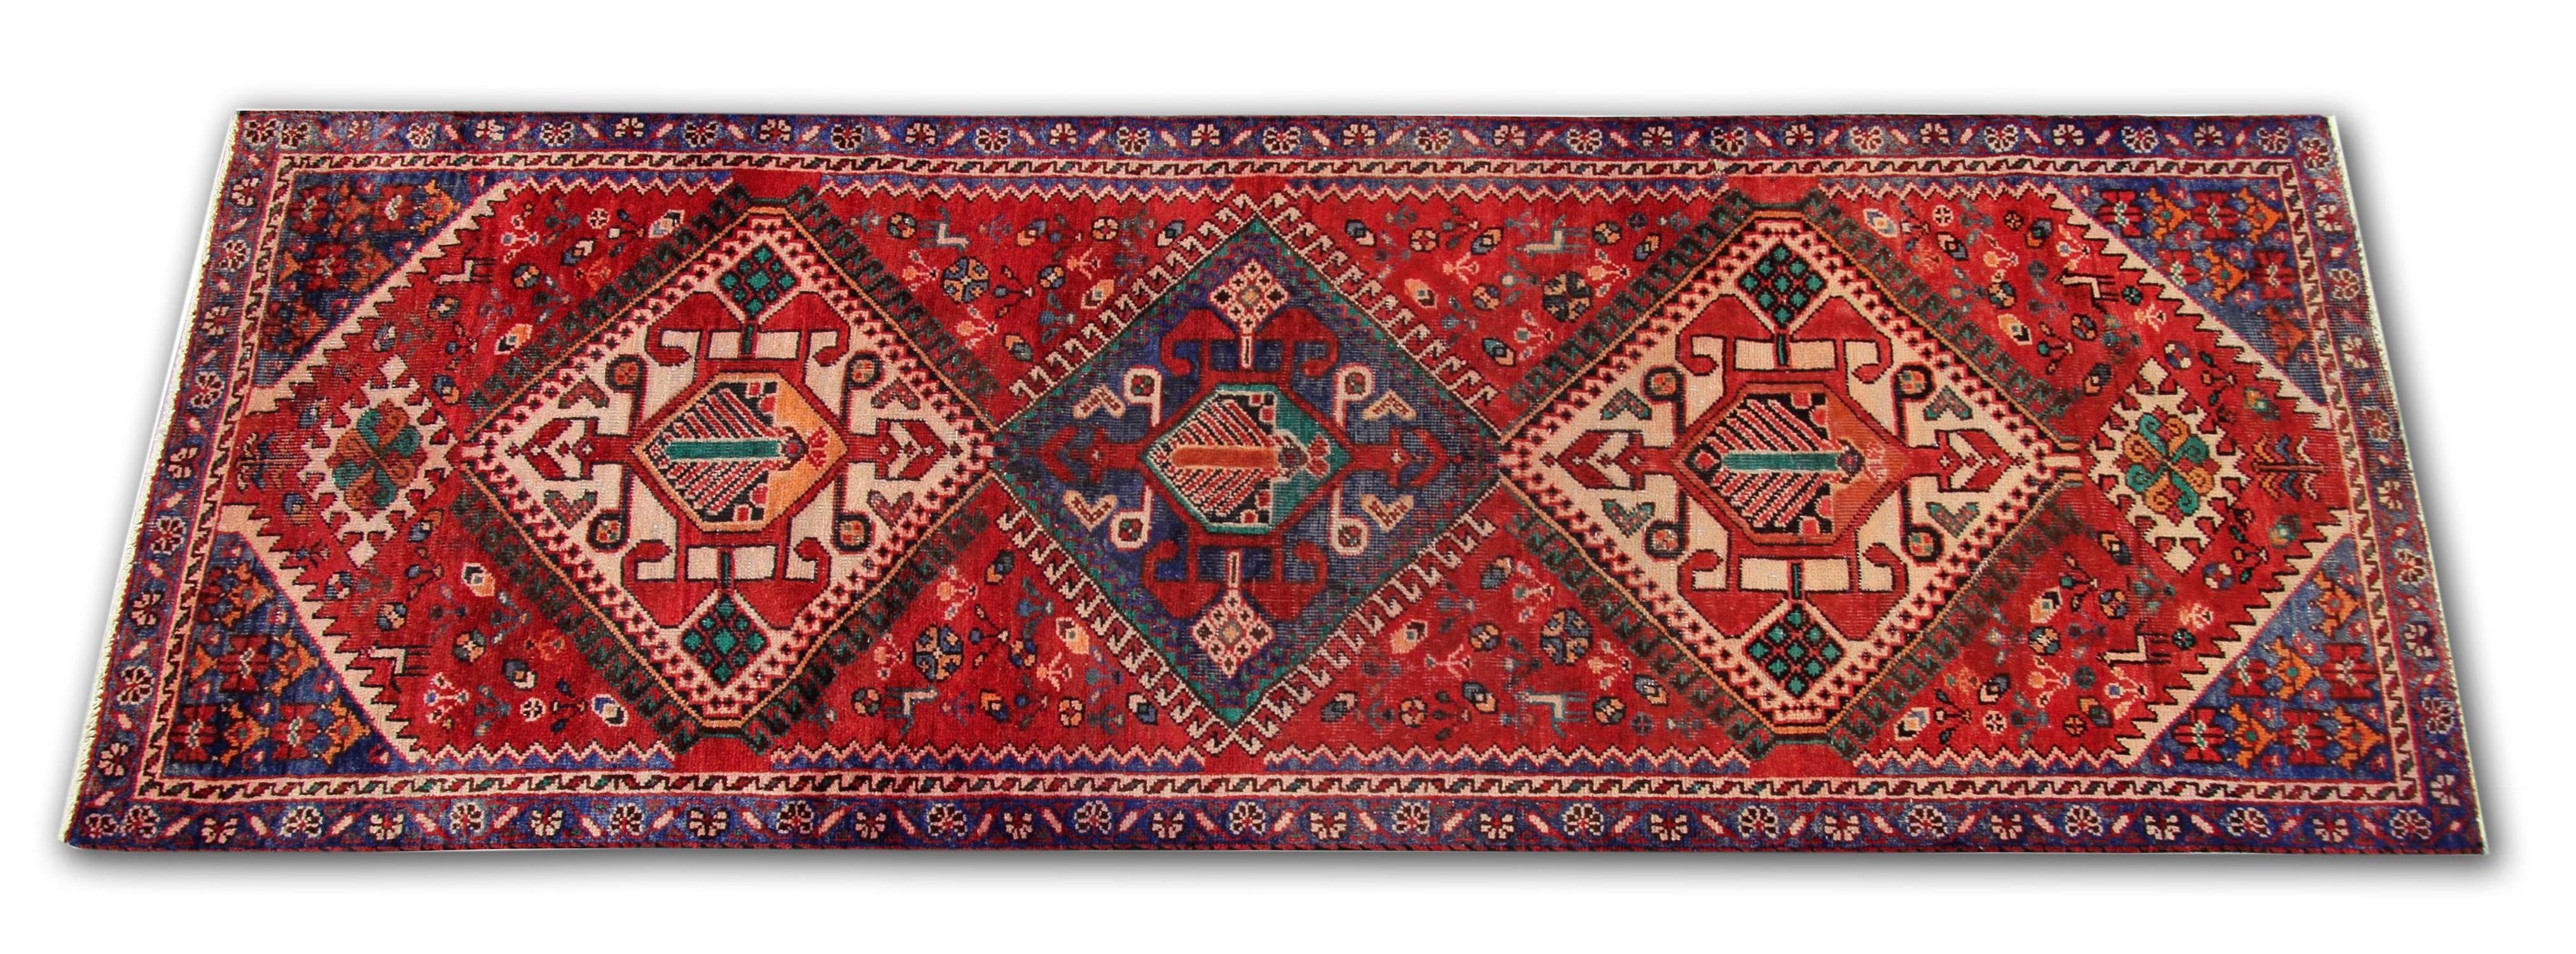 Are you looking for a new vintage carpet to add texture and style to your home? Then look no further. This fine wool area rug has been woven with a repeat medallion tribal pattern on a rich red background with cream, blue brown and beige accents